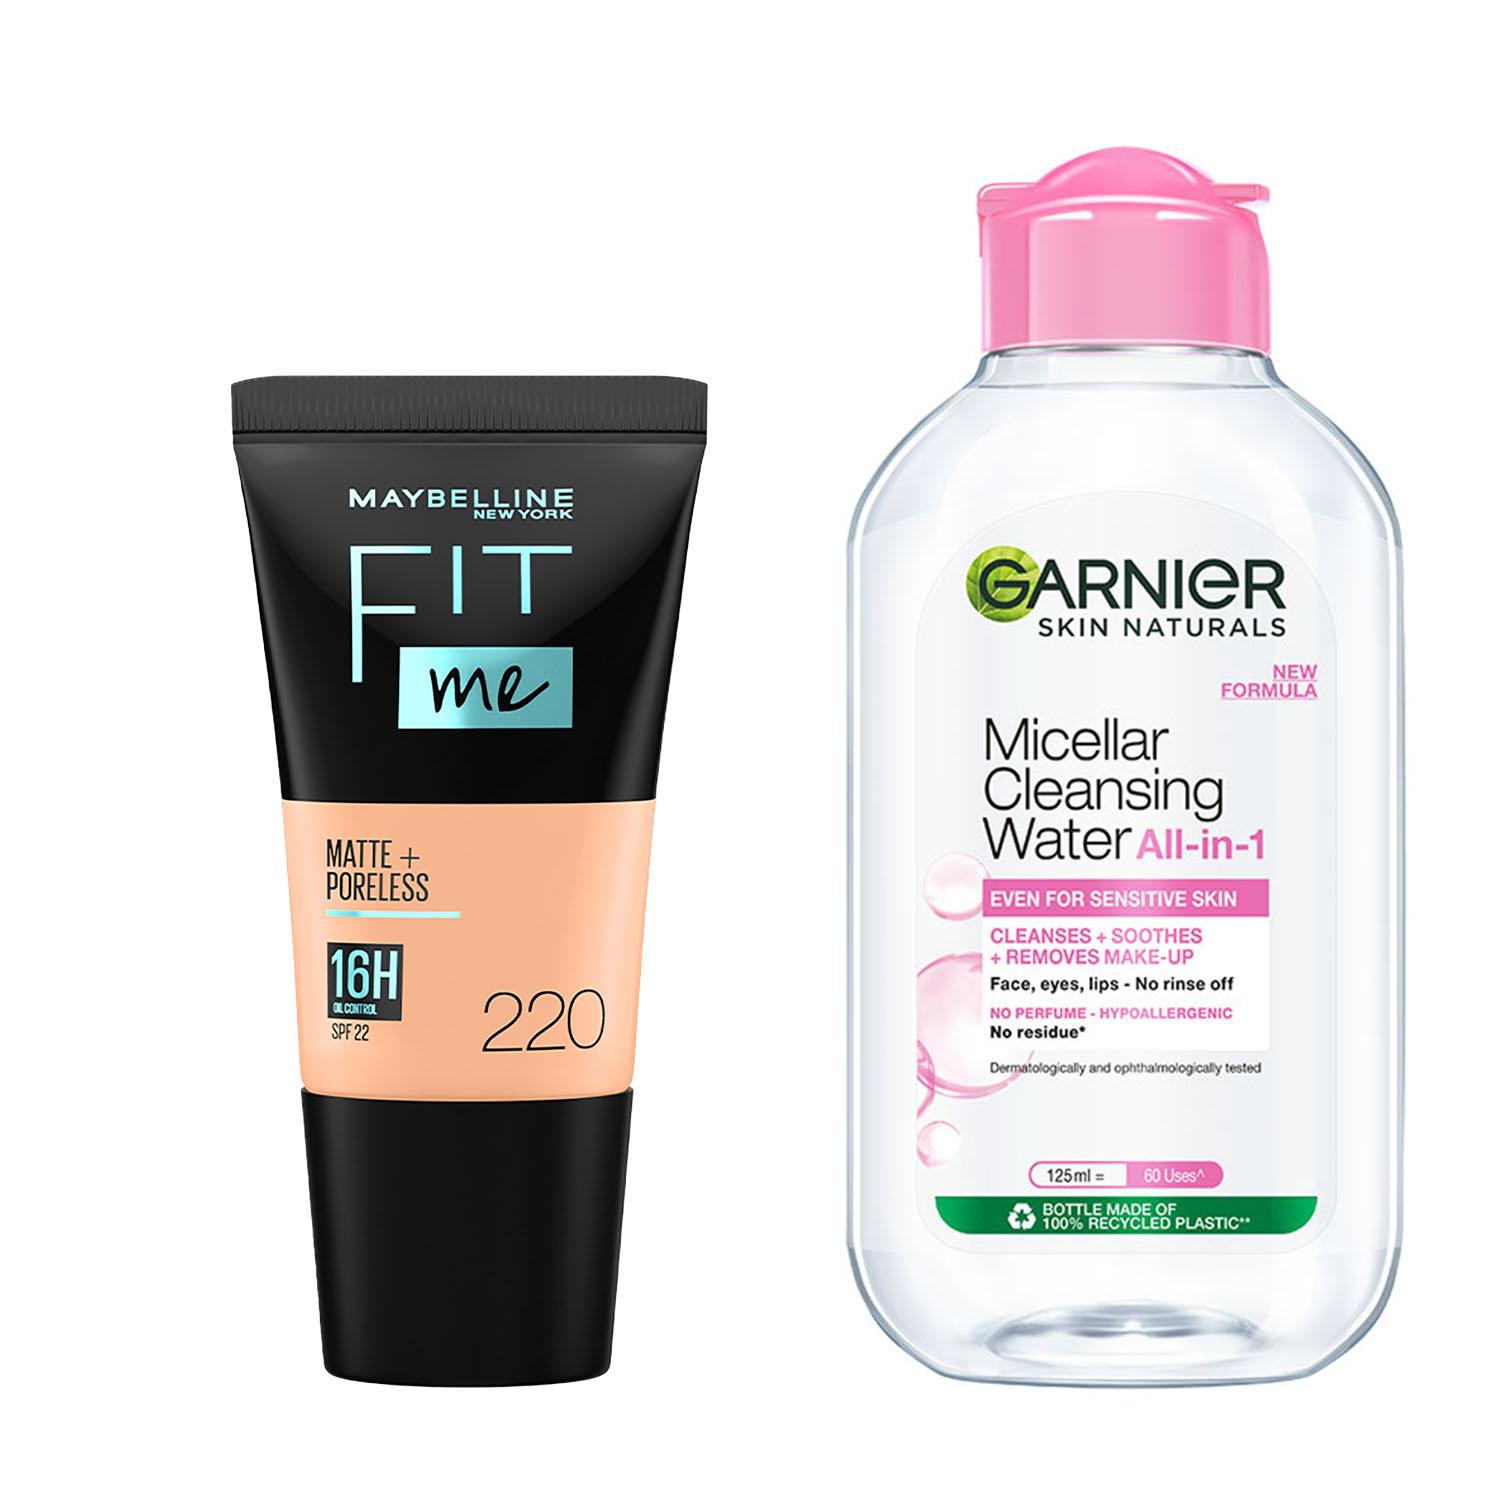 Maybelline New York | Maybelline New York Fit Me Foundation Tube, 220 with Garnier Micellar Cleansing Water Combo